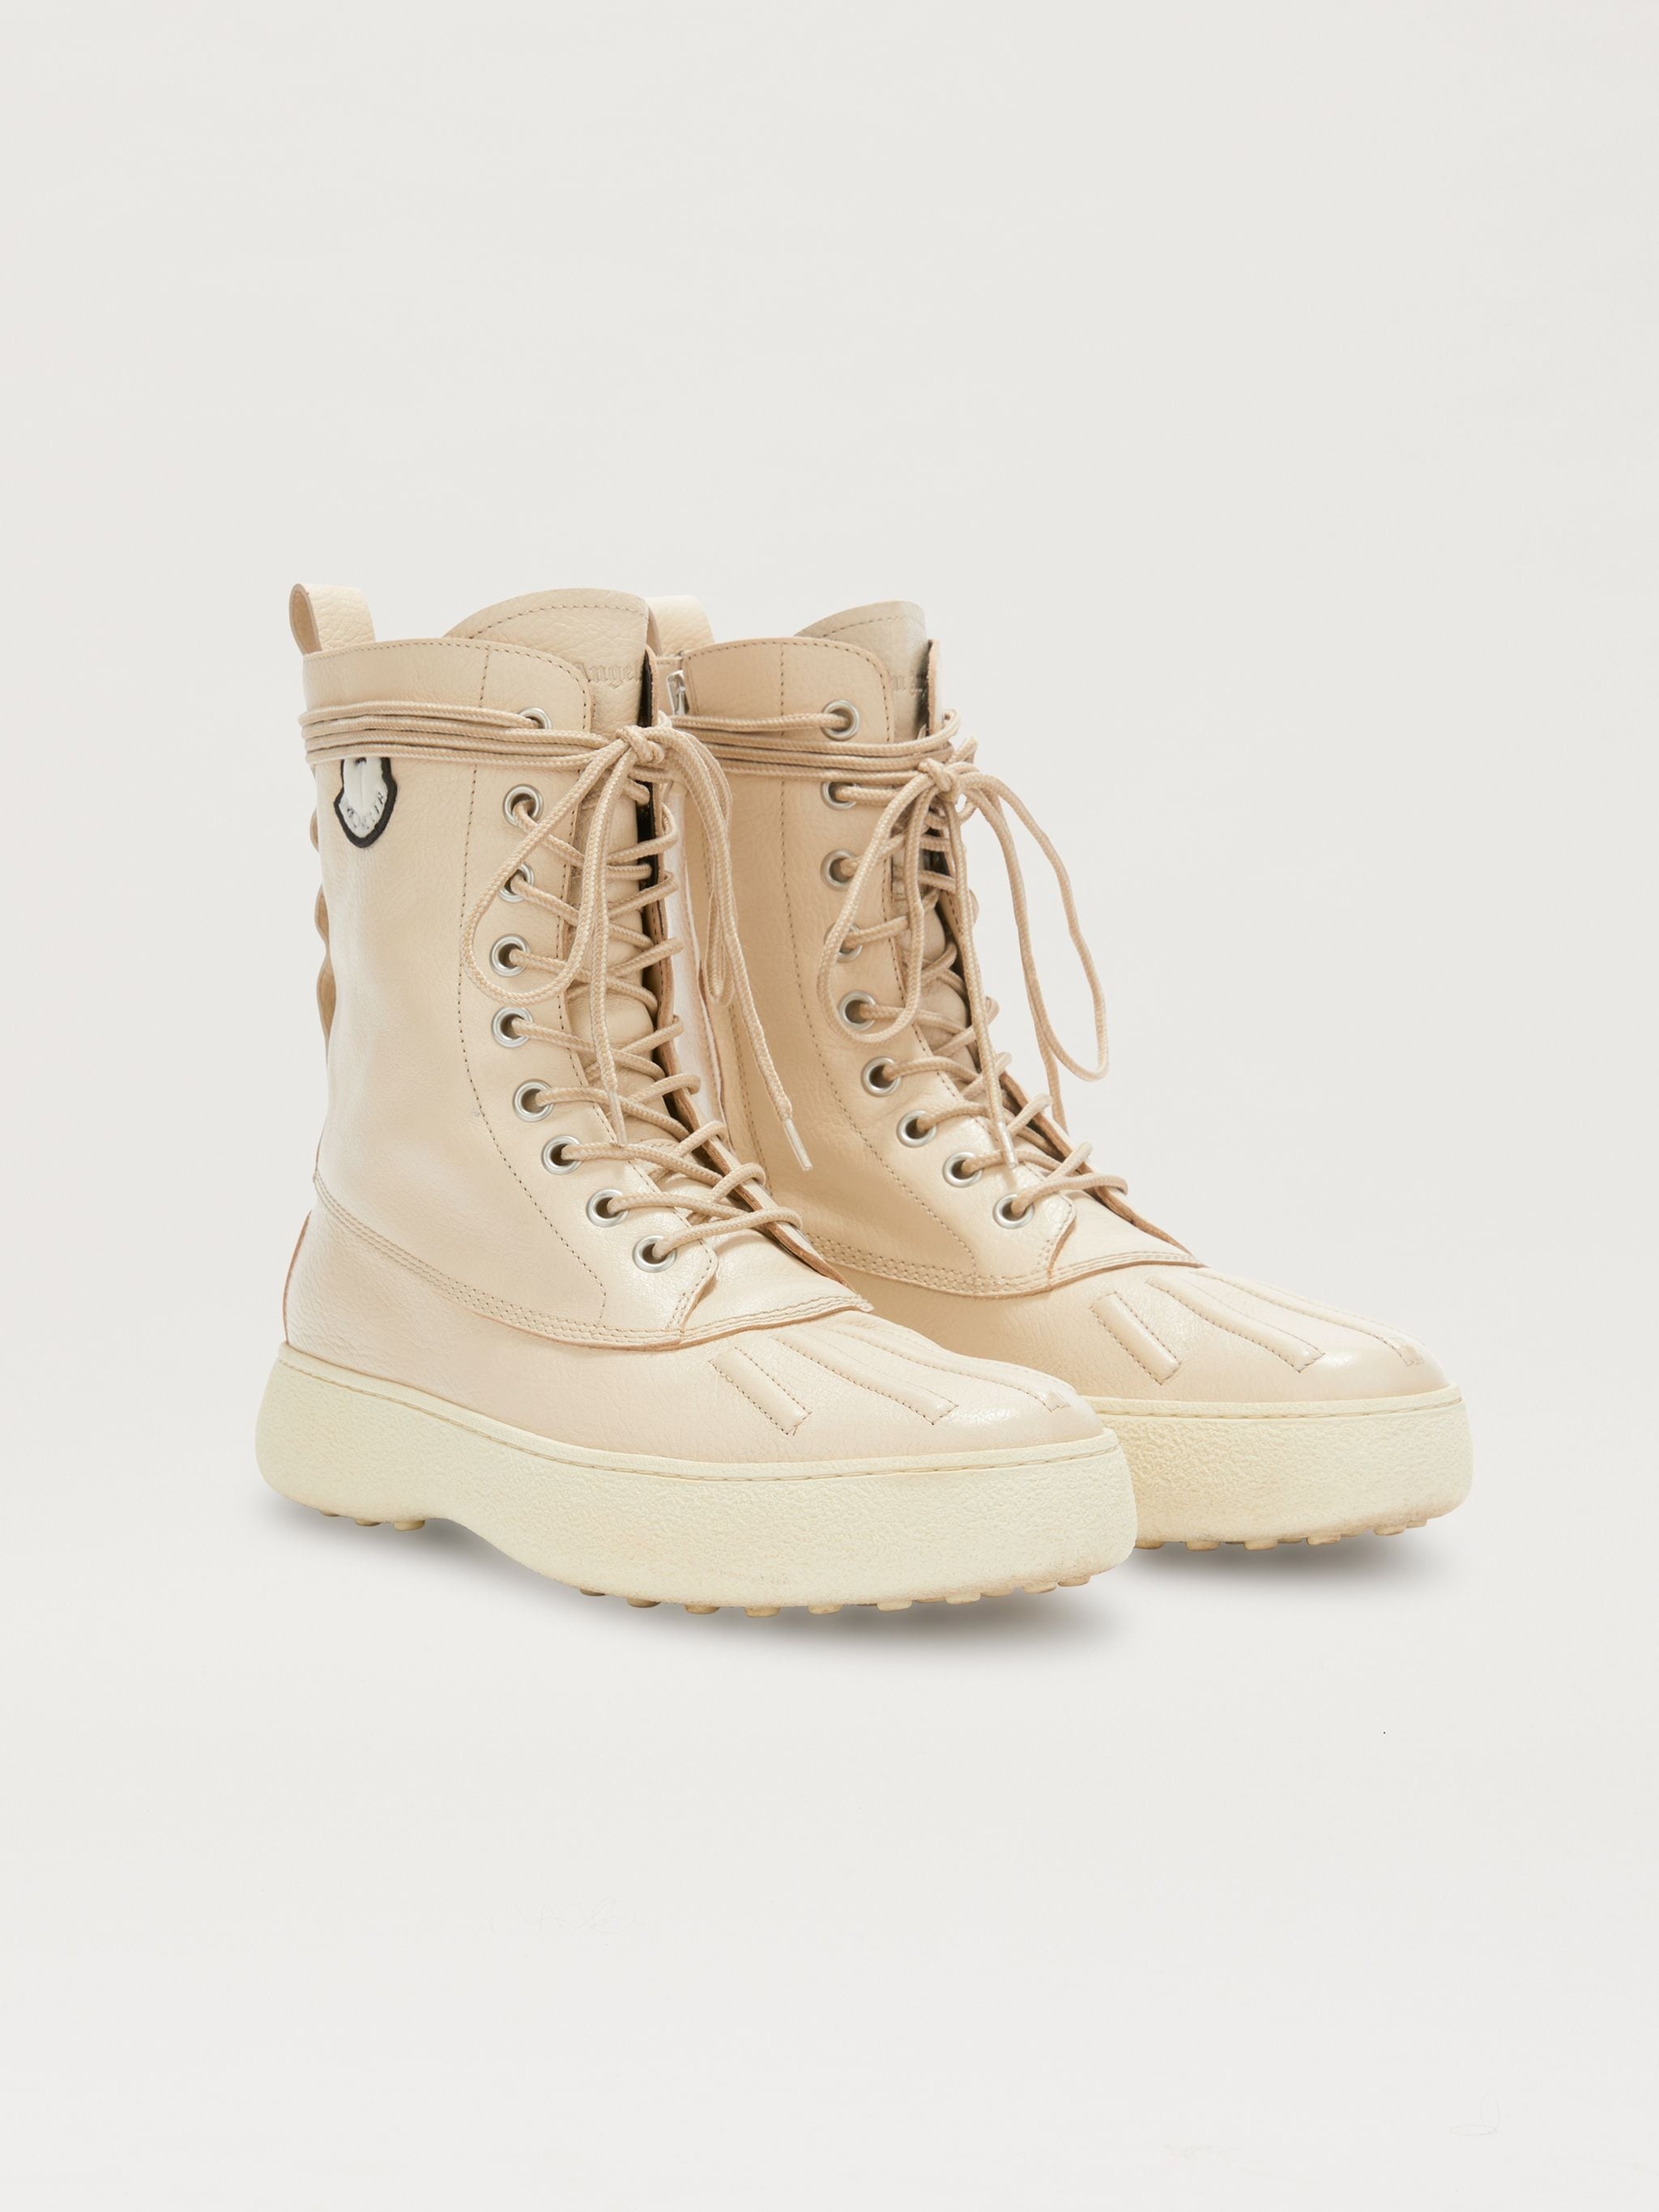 8 MONCLER PALM ANGELS WINTER GOMMINO HIGH - 2